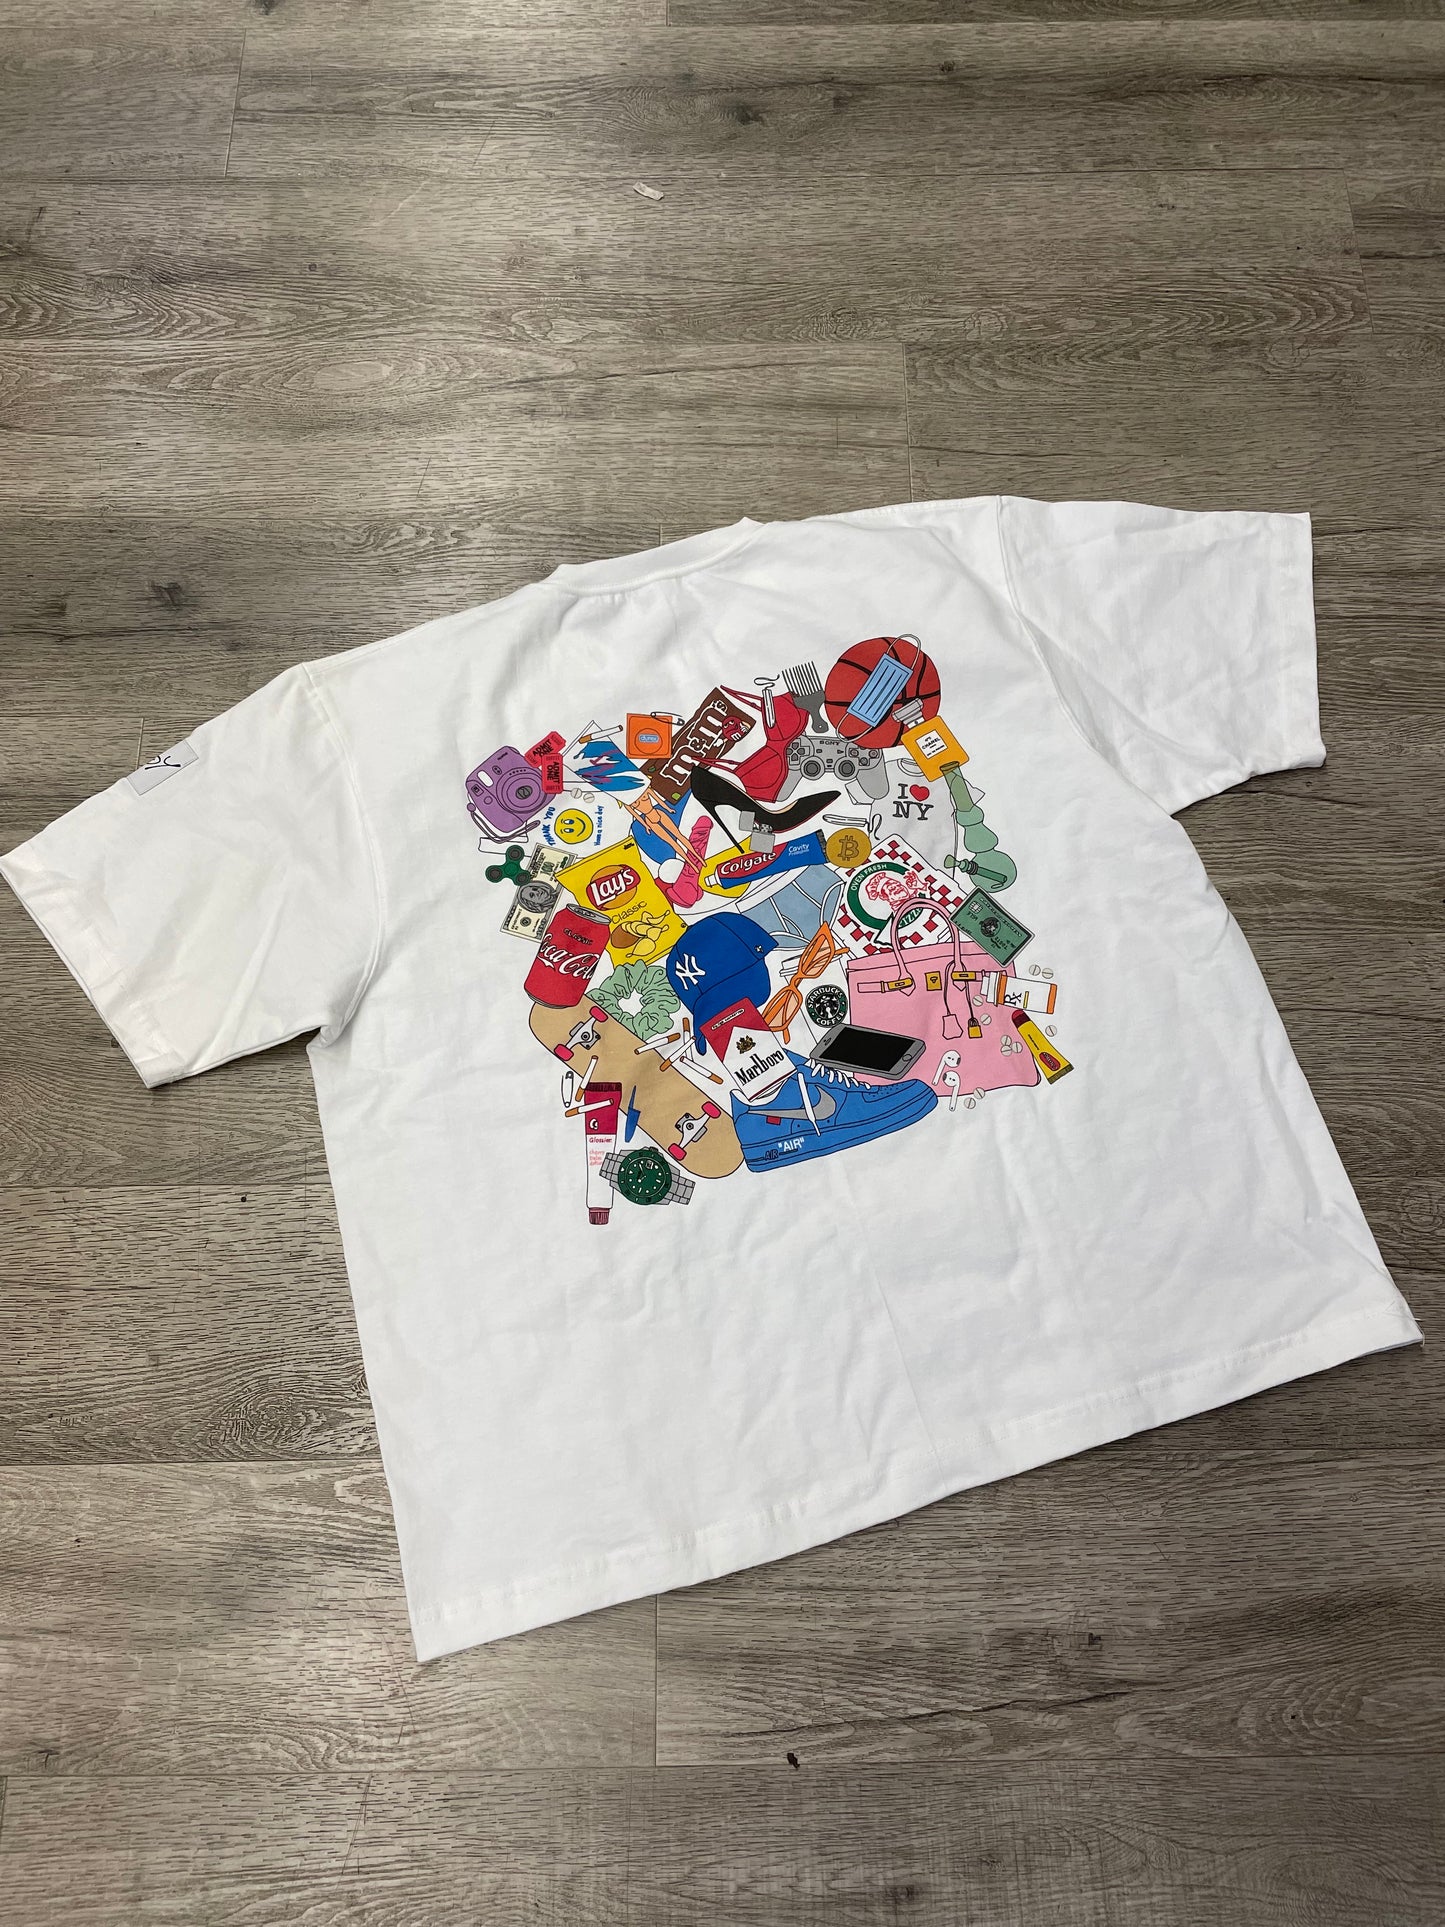 Andy Lifestyle Tee